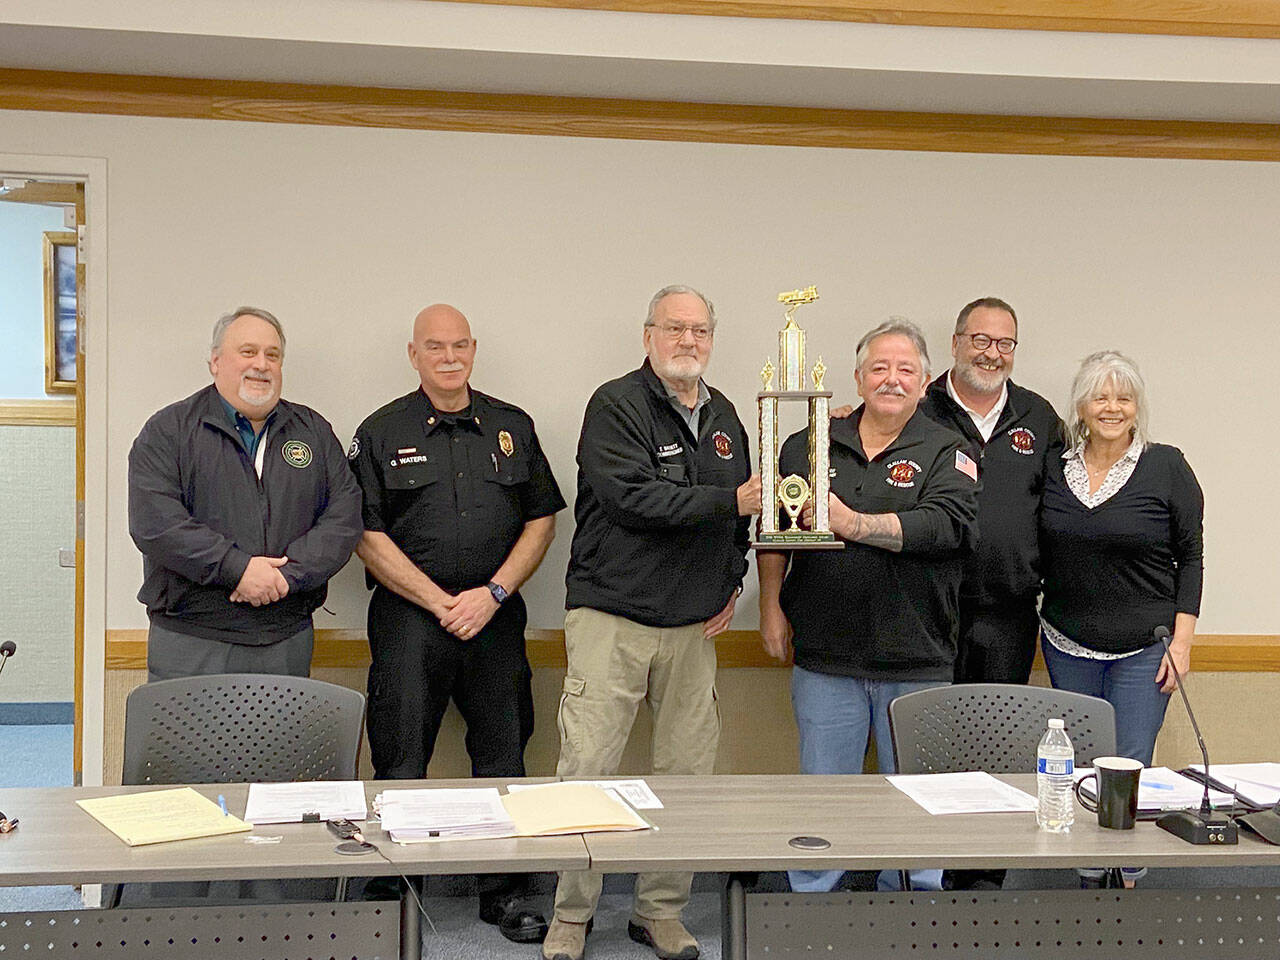 Pictured from left to right are Roger Ferris, executive director of the Washington State Fire Commissioners Association; Fire Chief Greg Waters; Commissioner Terry Barnett; Commissioner Ben Pacheco, commission chair; Commissioner Sam Nugent; and Commissioner Lynne Kastner.